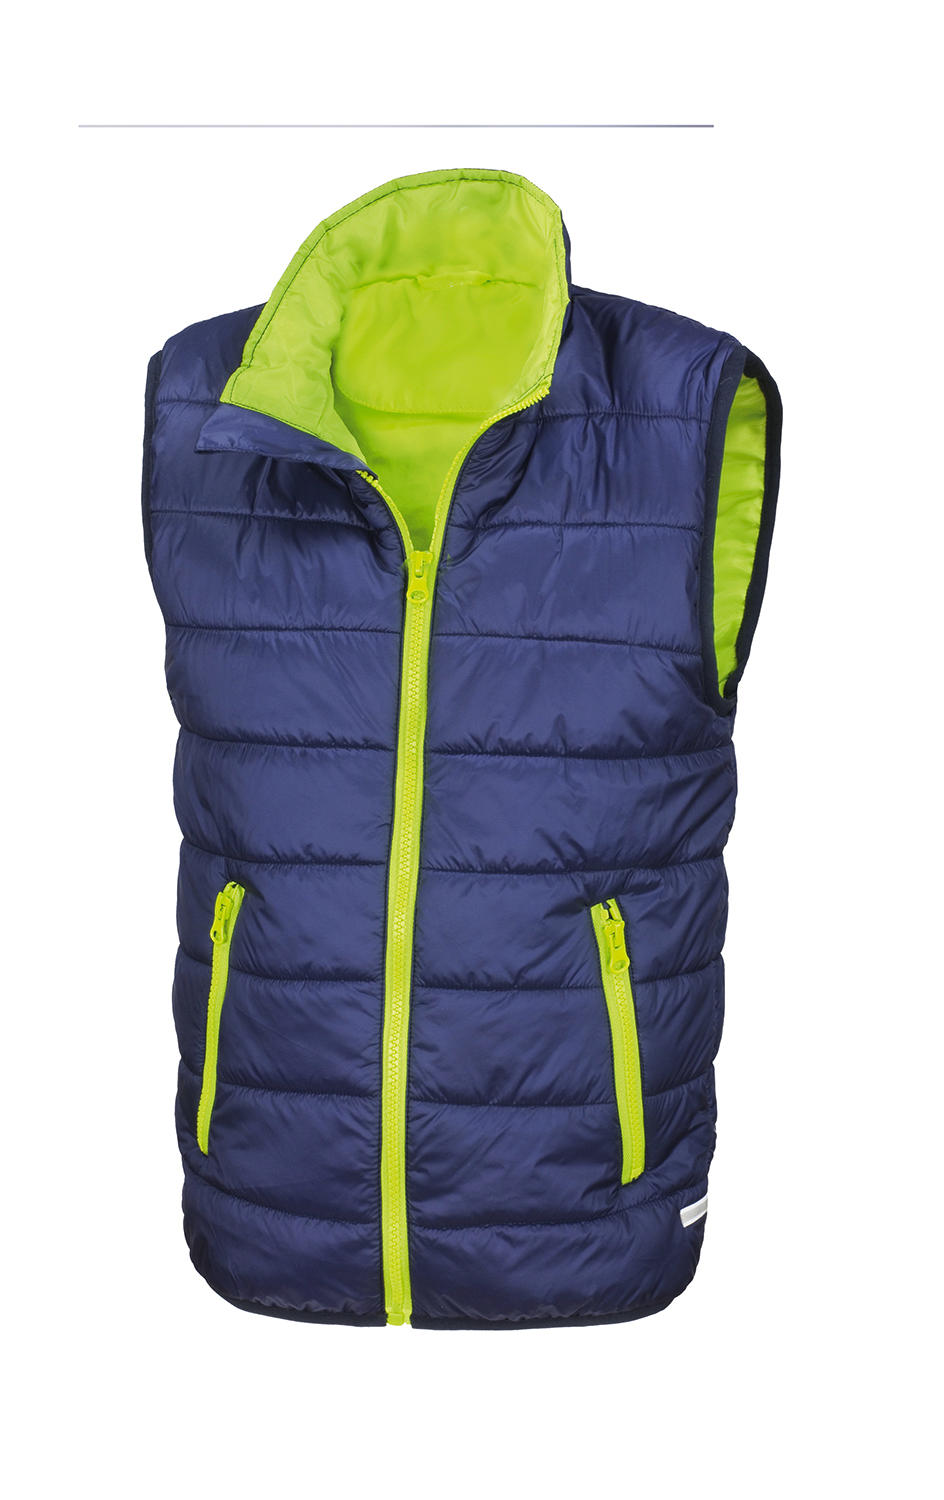  Junior/Youth Padded Bodywarmer in Farbe Navy/Lime